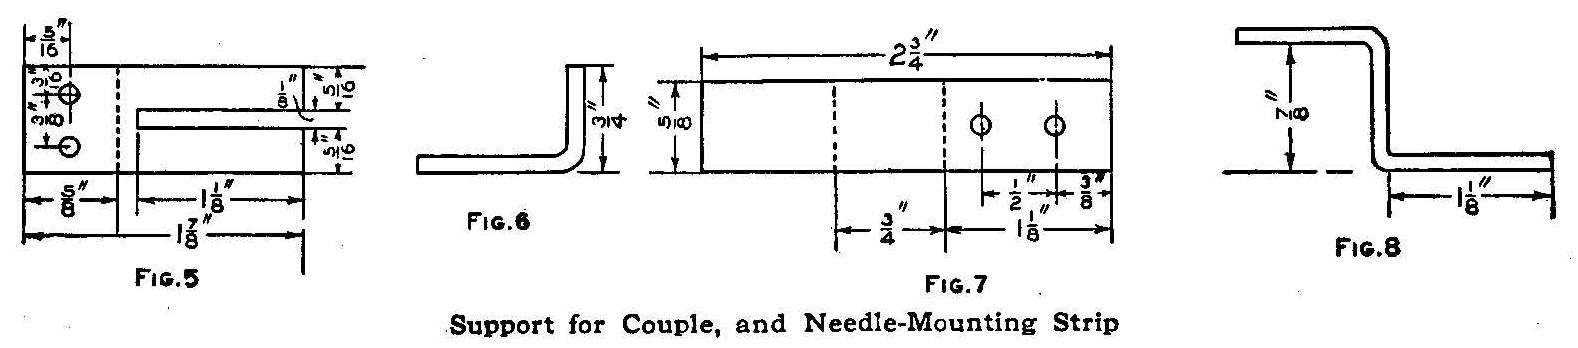 Support for Couple, and Needle-Mounting Strip 